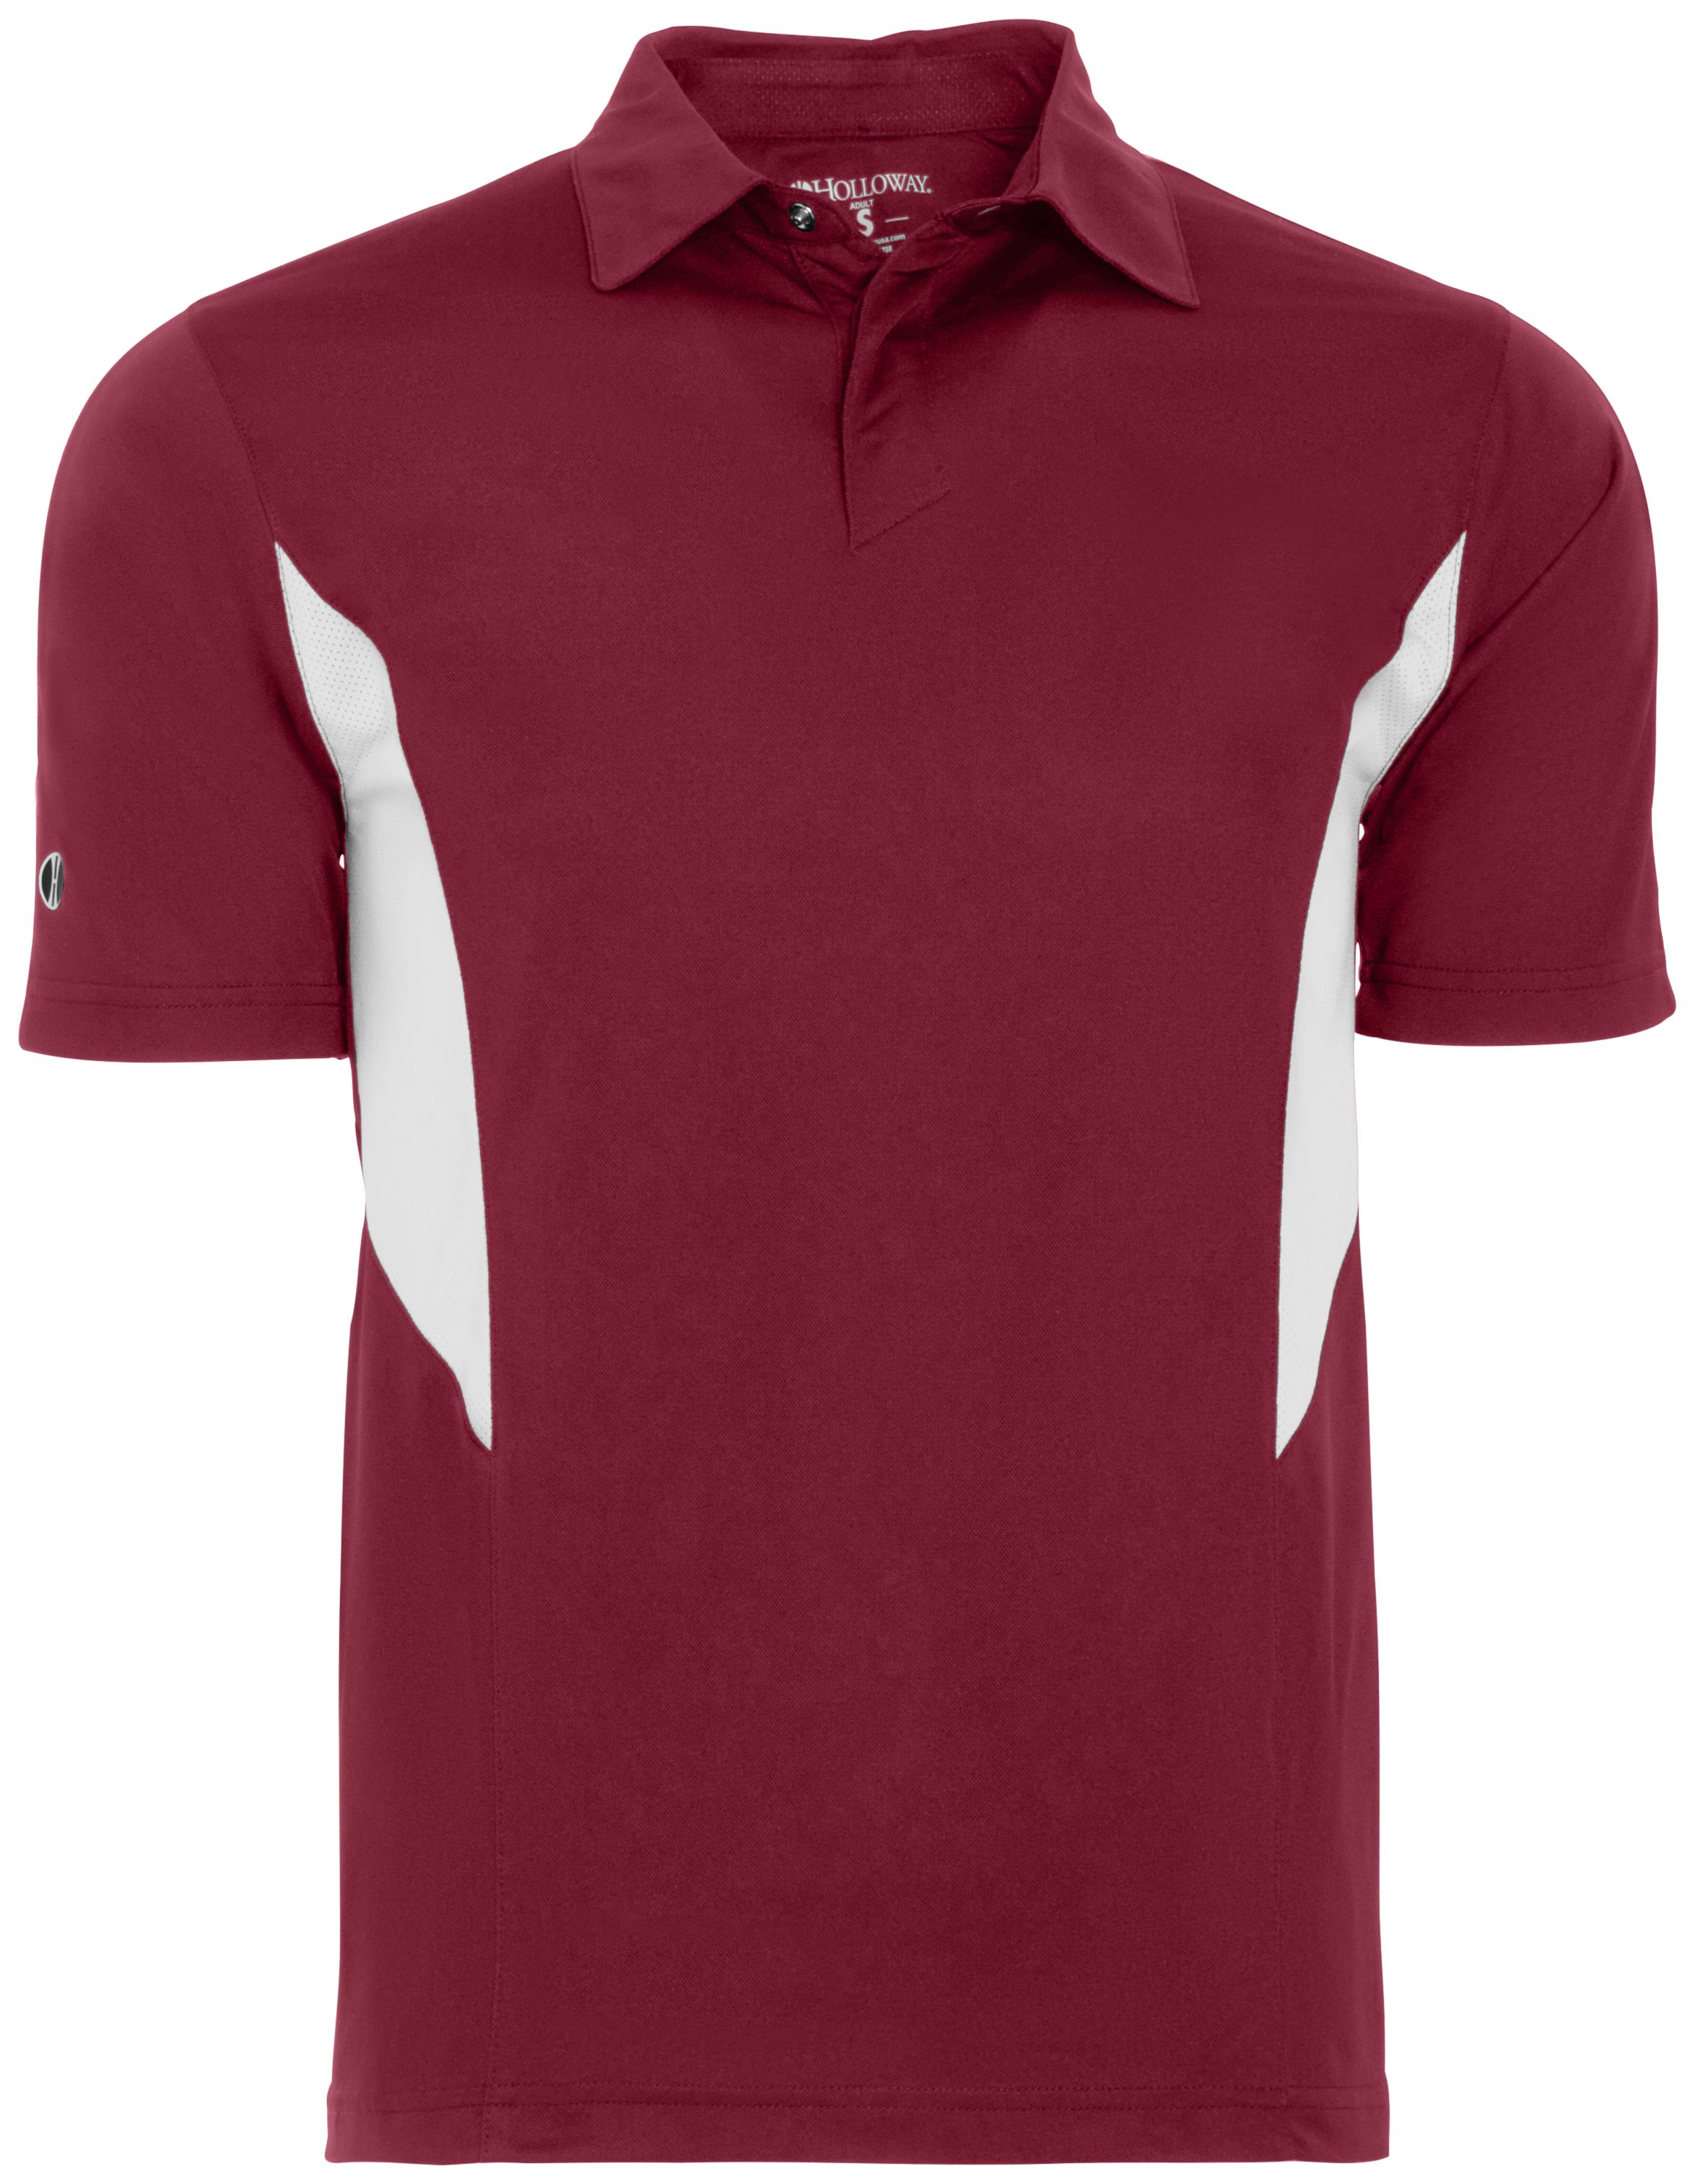 Details about   Holloway Shark New Snag Resistant 100% Dry-Excel Polyester Bite Polo 222408 